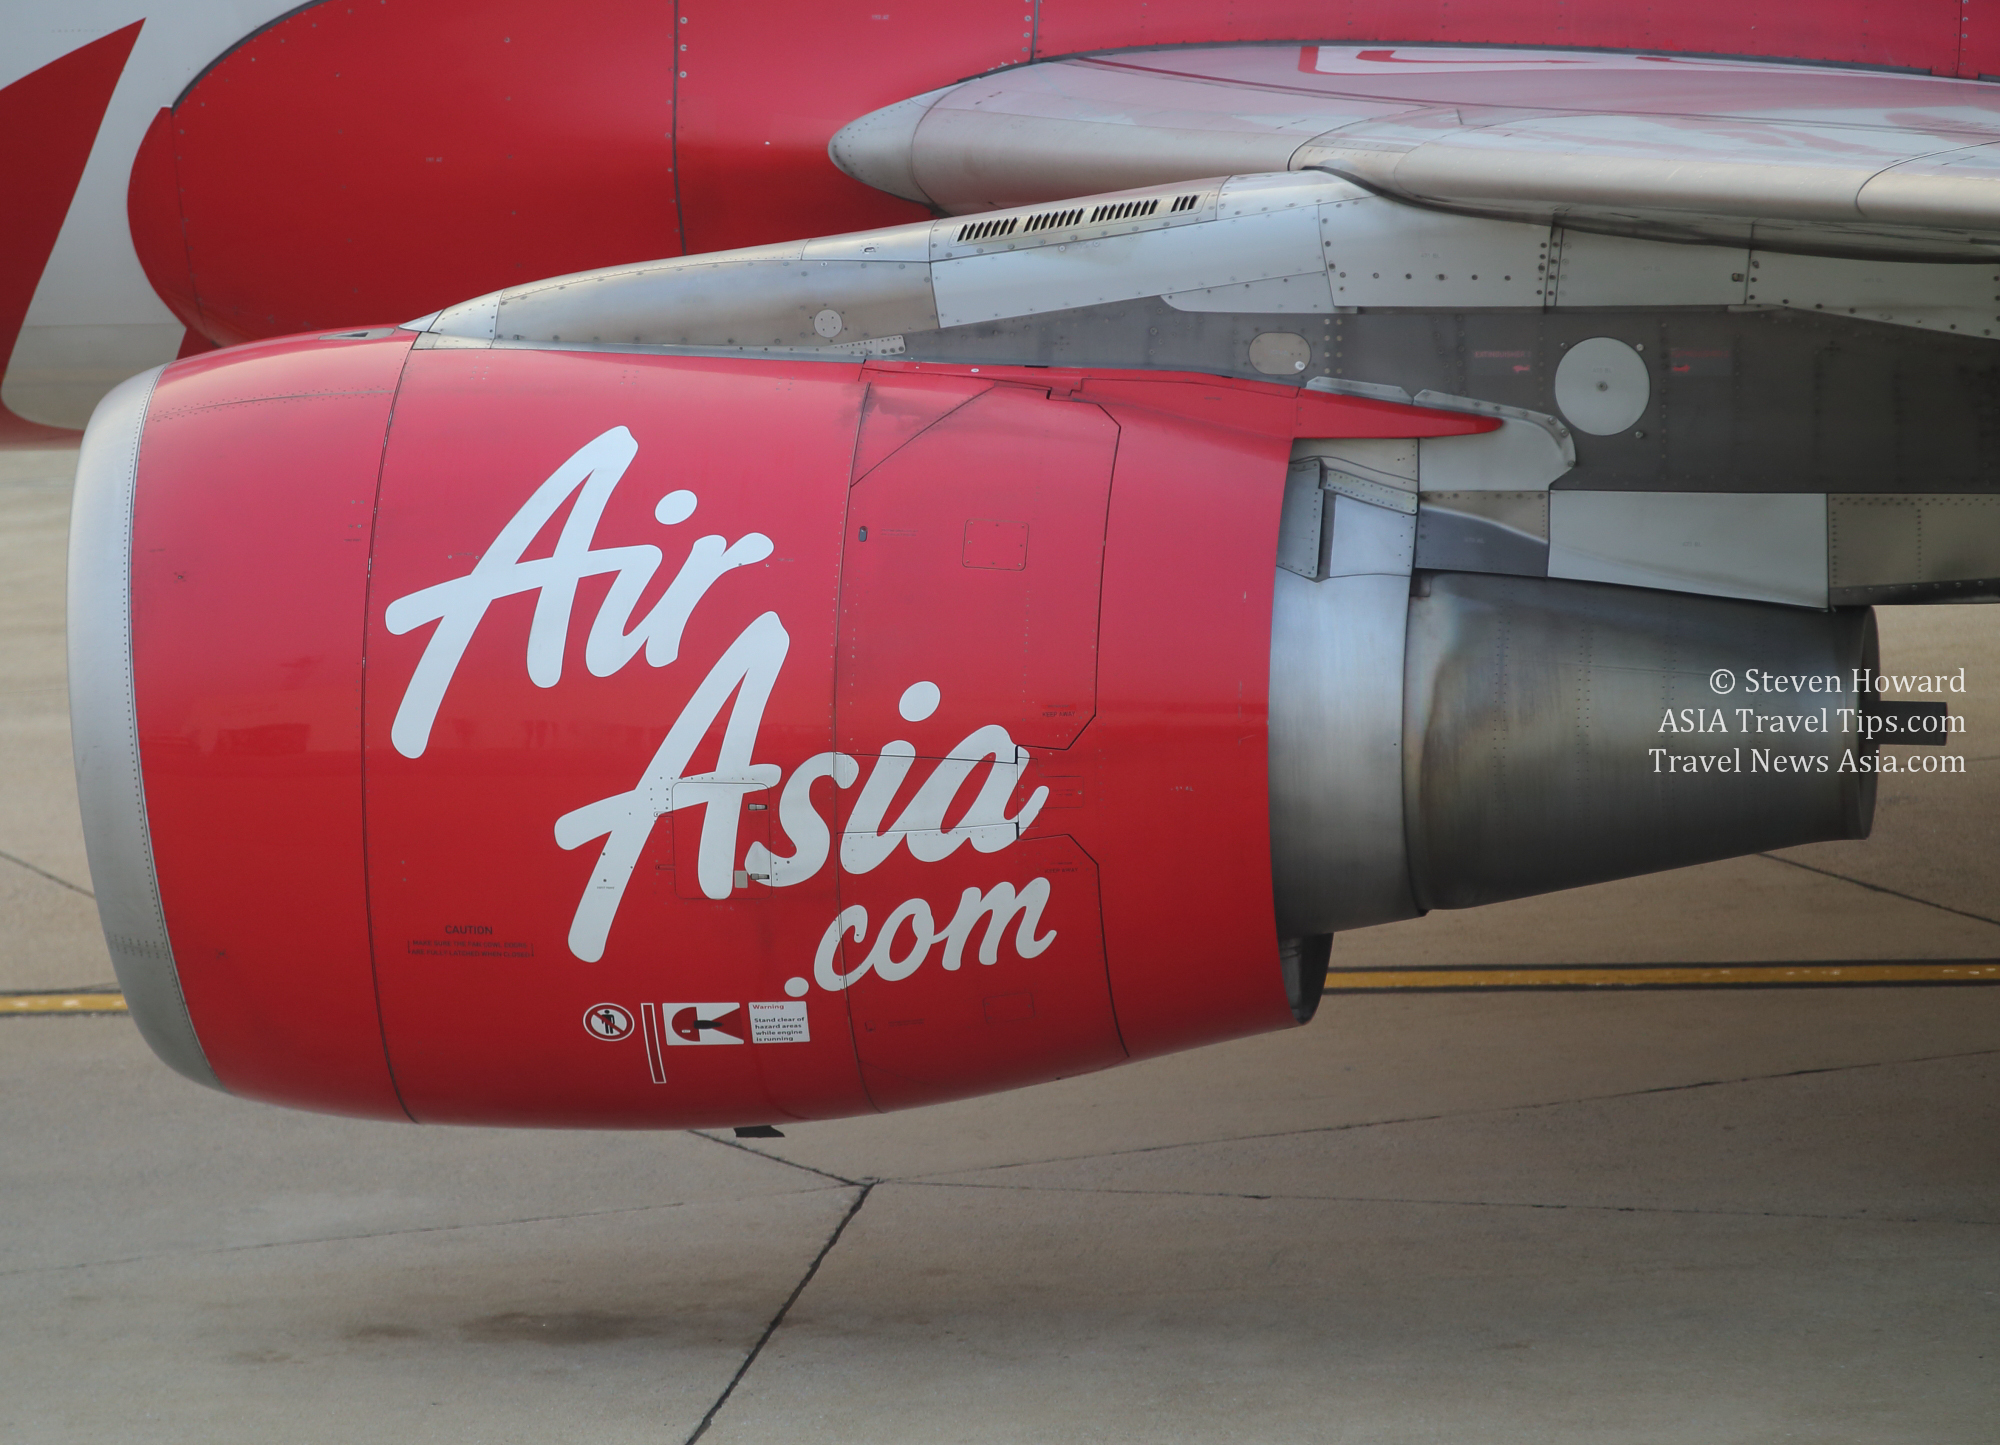 Engines on an AirAsia Airbus A320. Picture by Steven Howard of TravelNewsAsia.com Click to enlarge.